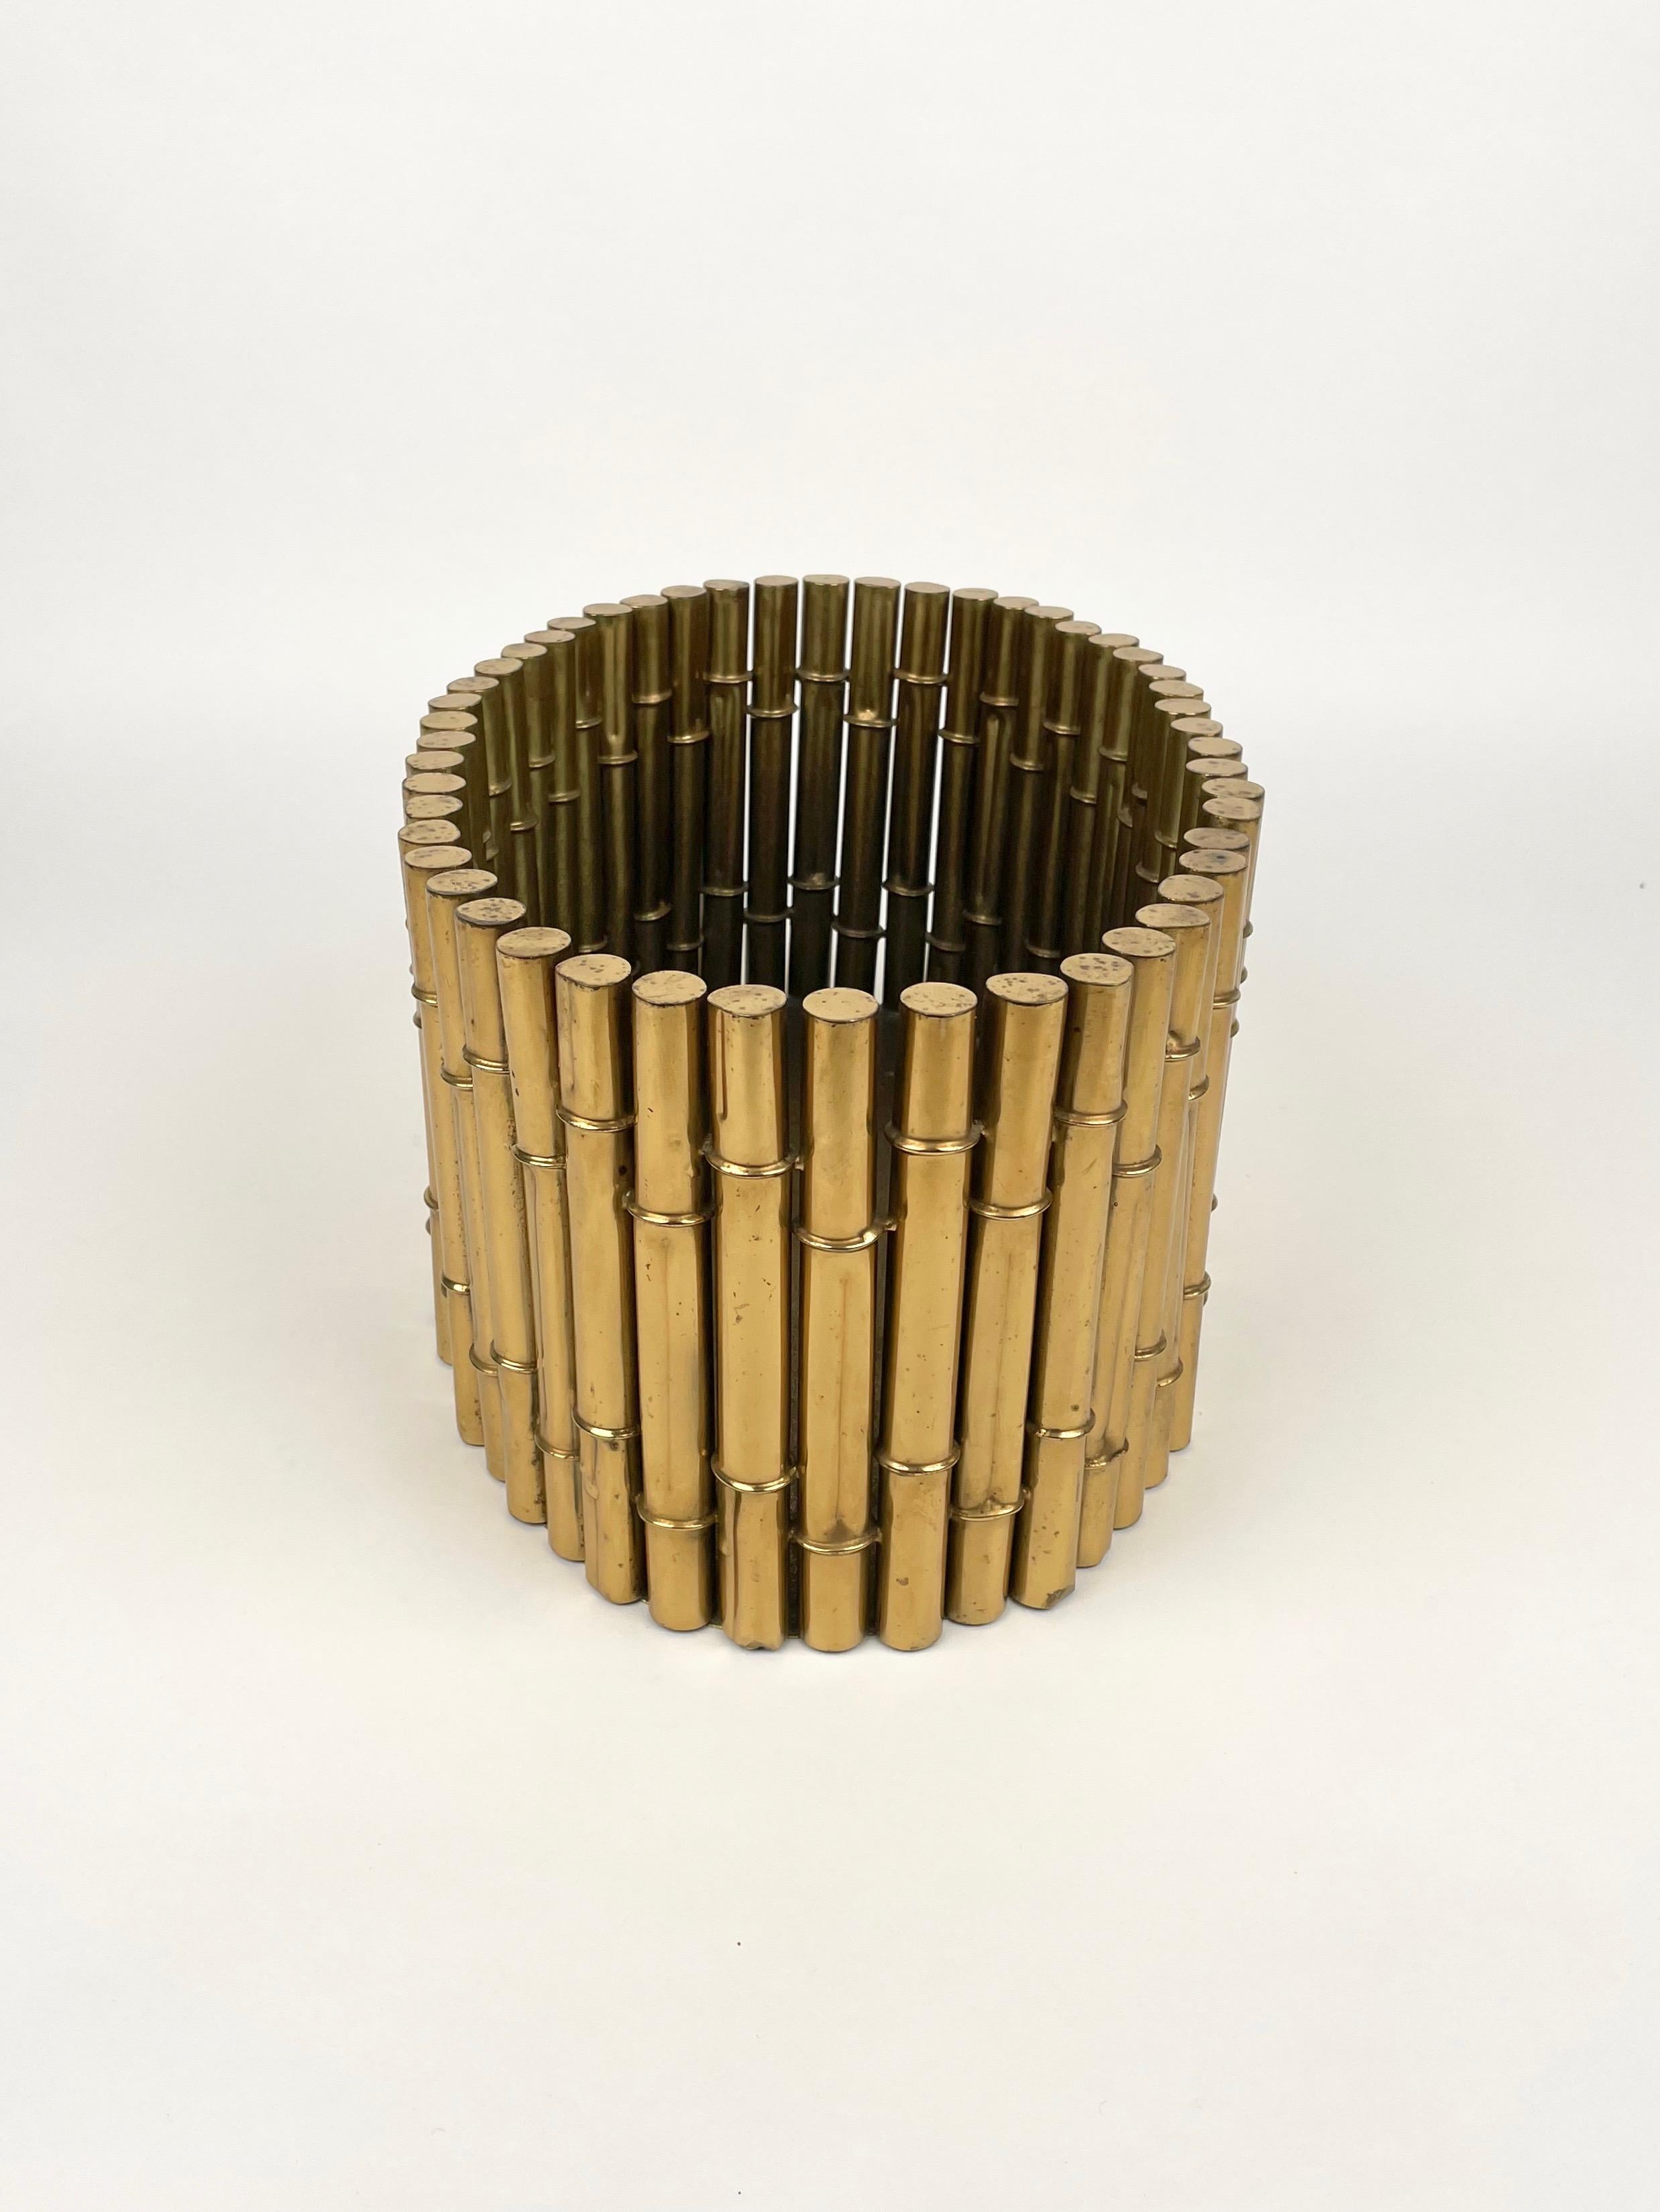 Brass Faux Bamboo Magazine Rack or Basket, by Bottega Gadda, Italy 1970s For Sale 6